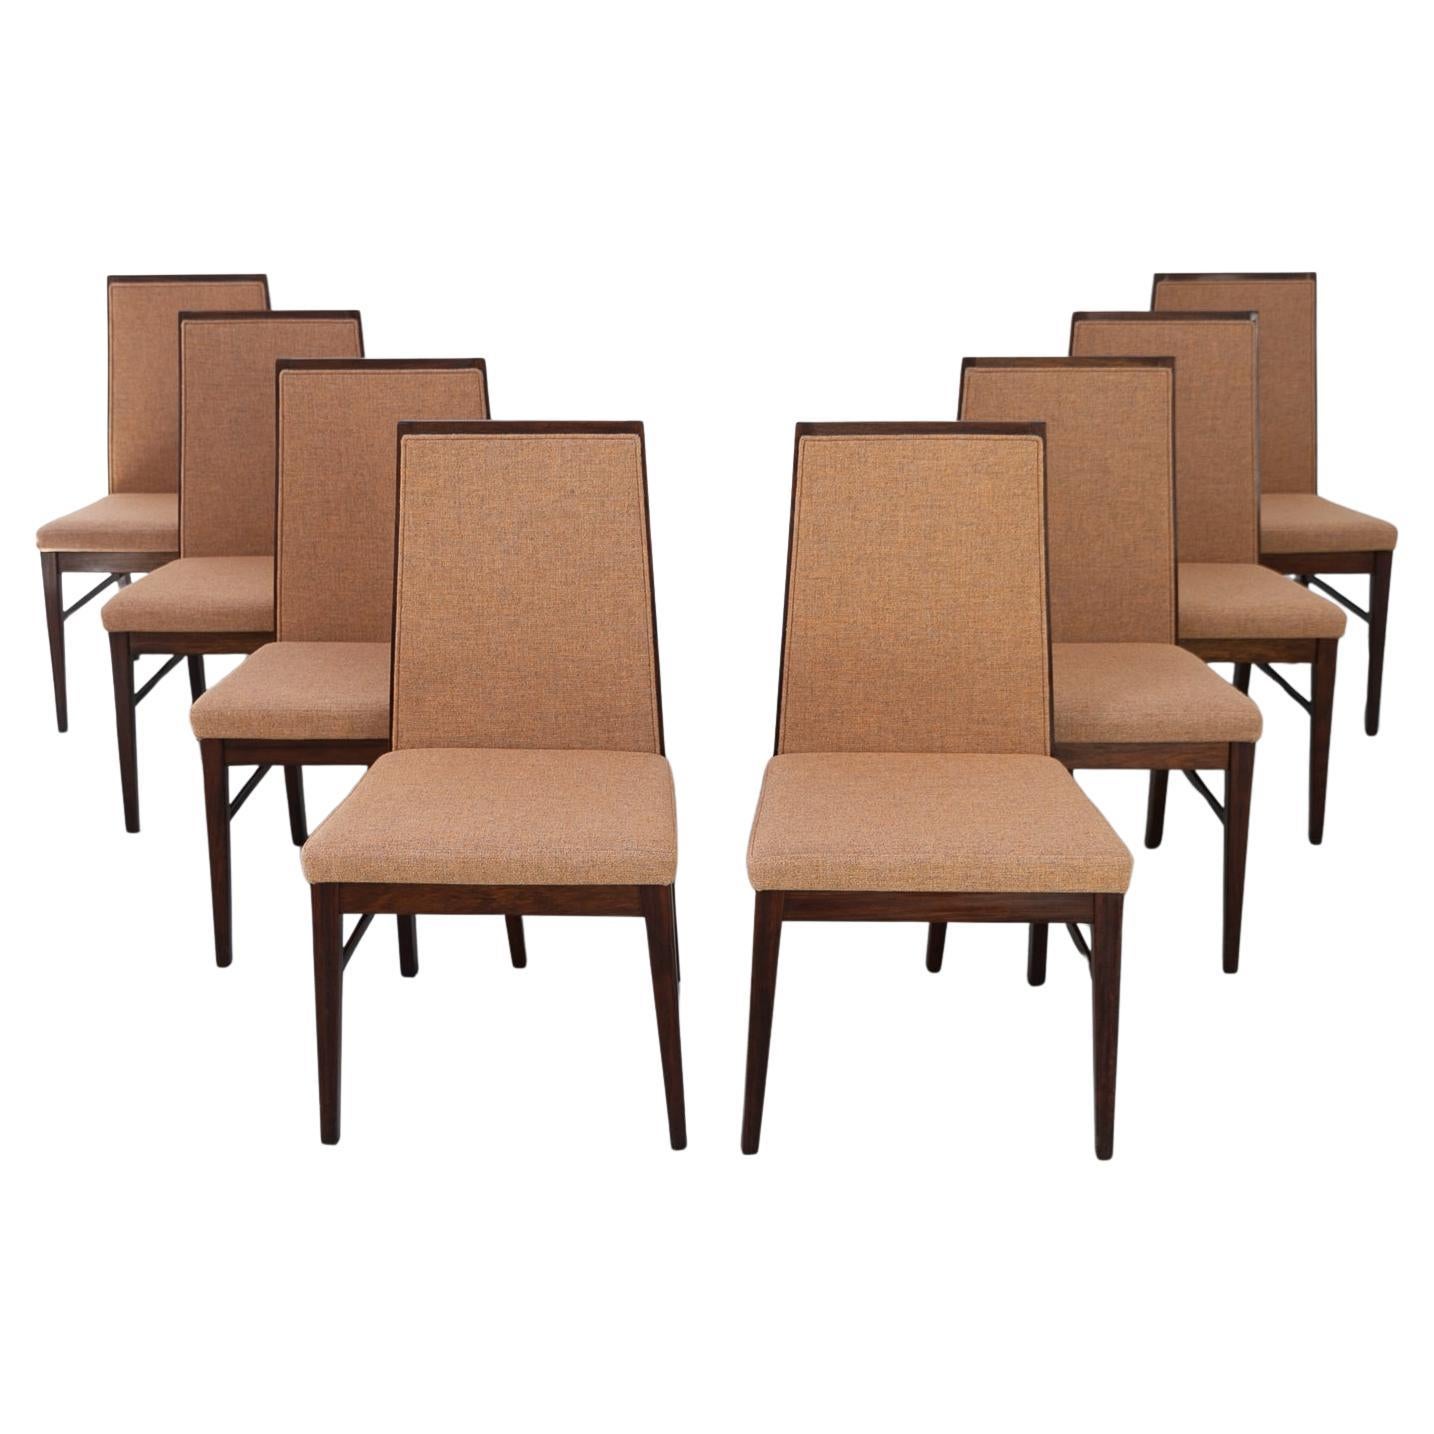 Danish Modern Rosewood Dining Chairs by Dyrlund, 1970s. Set of 8.